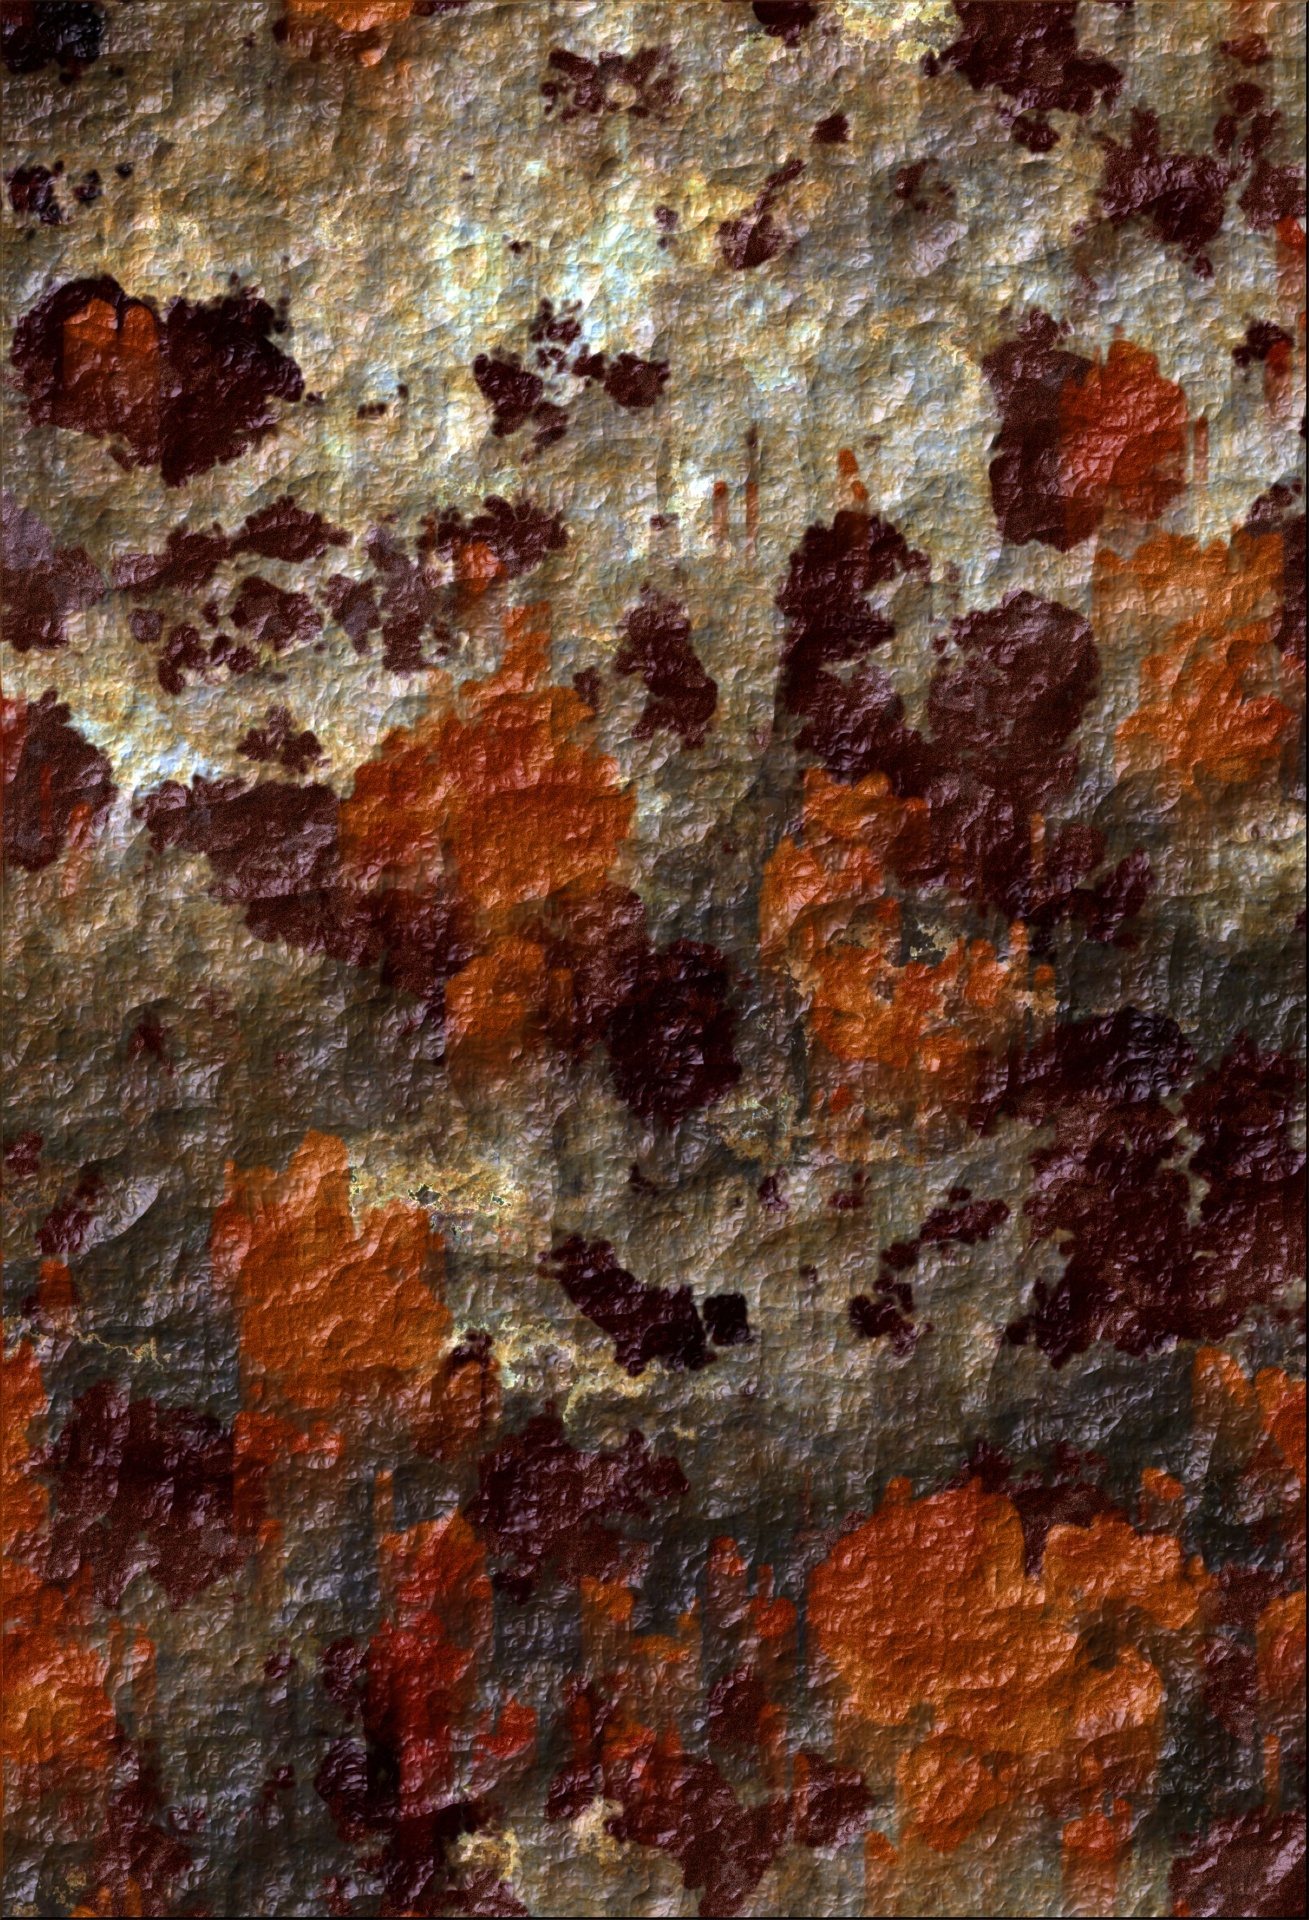 Rust background grunge texture abstract vintage pattern patterned structure rusty rotten old metal wall surface red colors colorful colored wallpaper poster design photo weathered